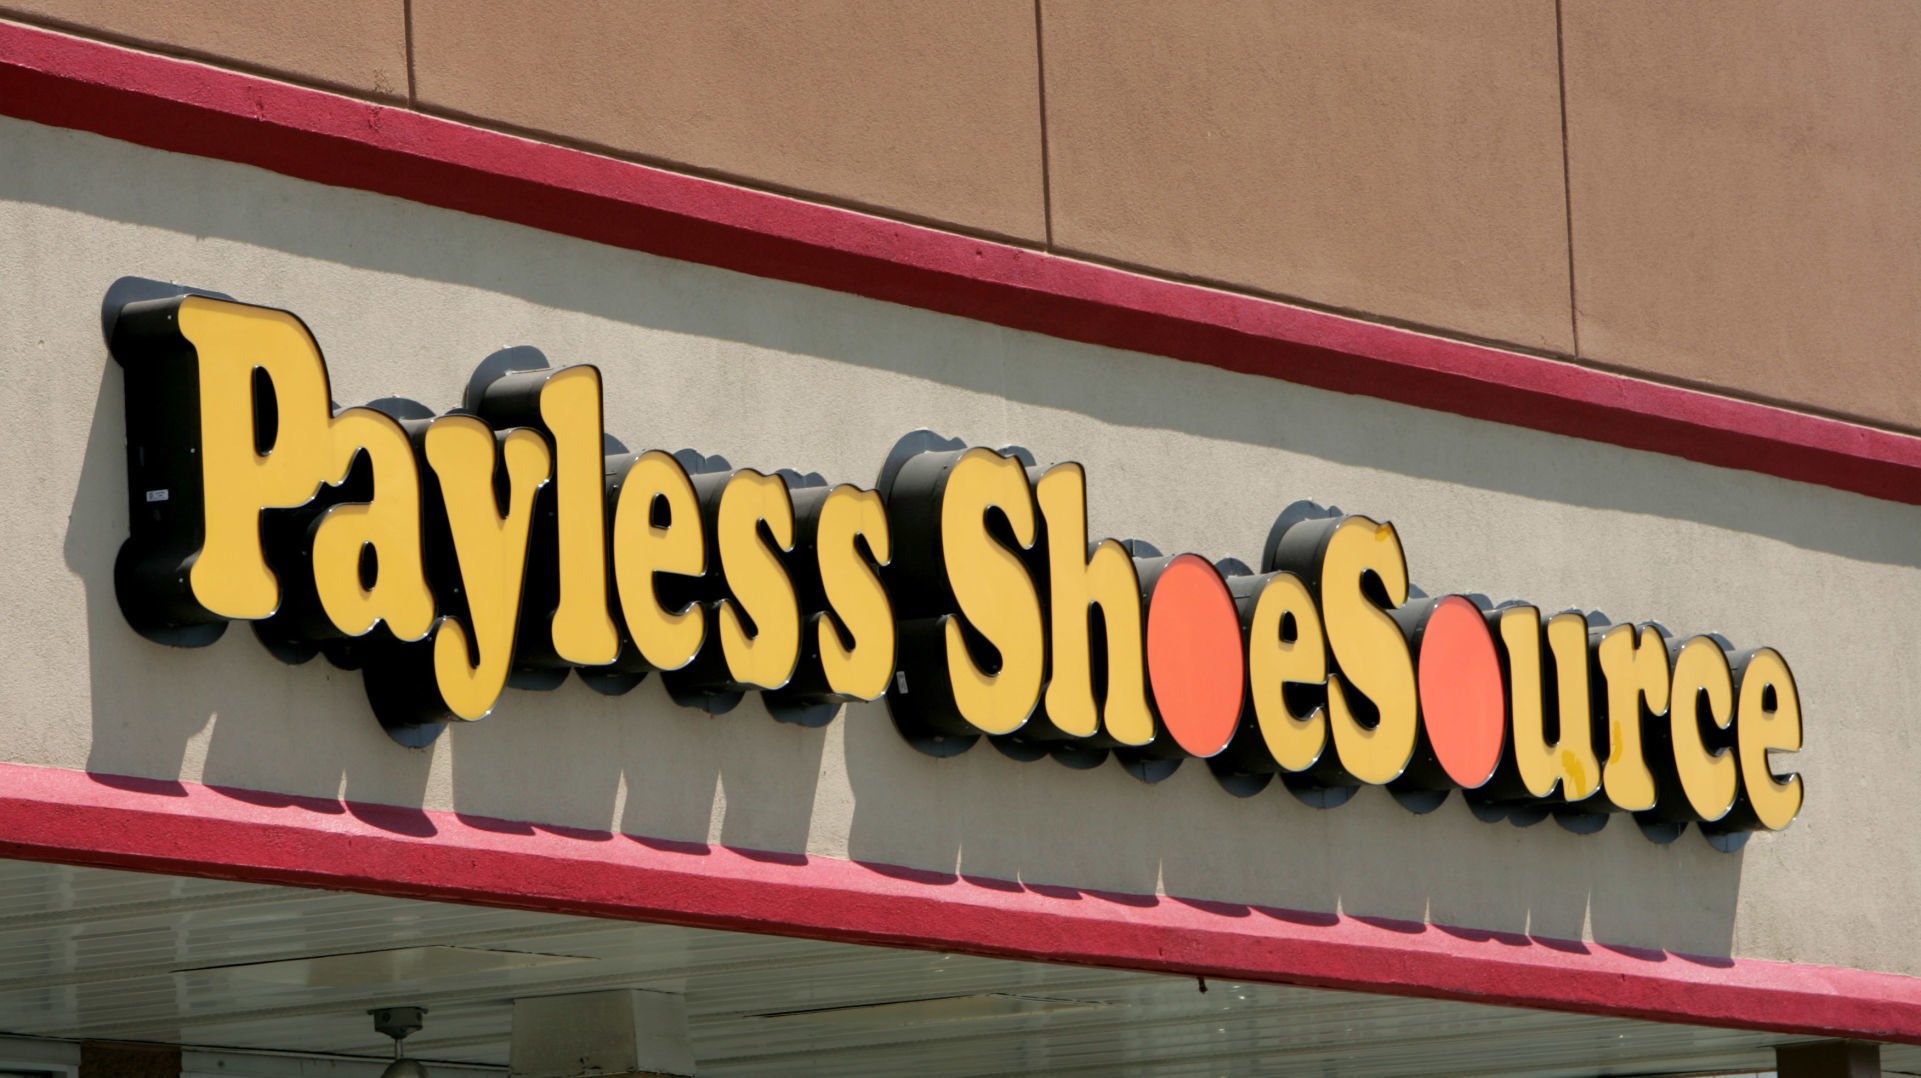 nearest payless shoesource to my location